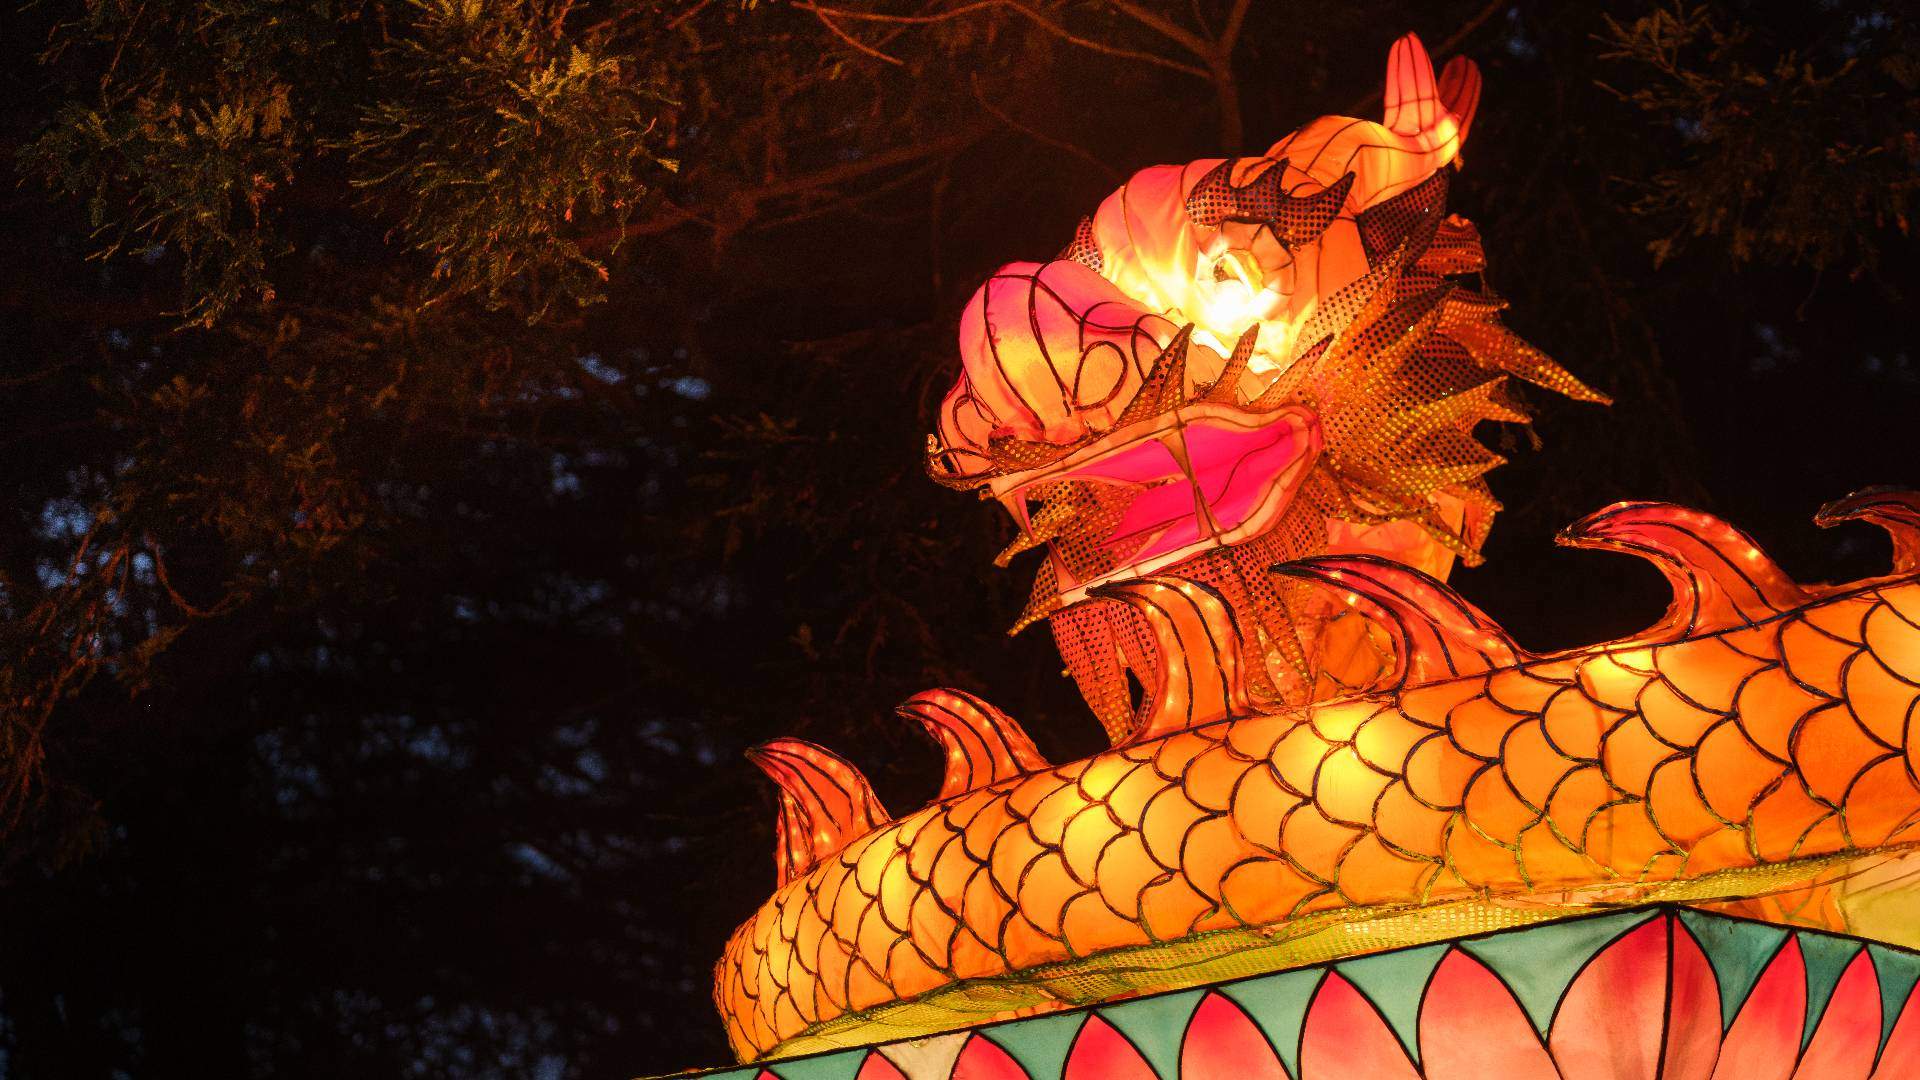 Auckland's BNZ Lantern Festival Is Back After Years of Cancellations in